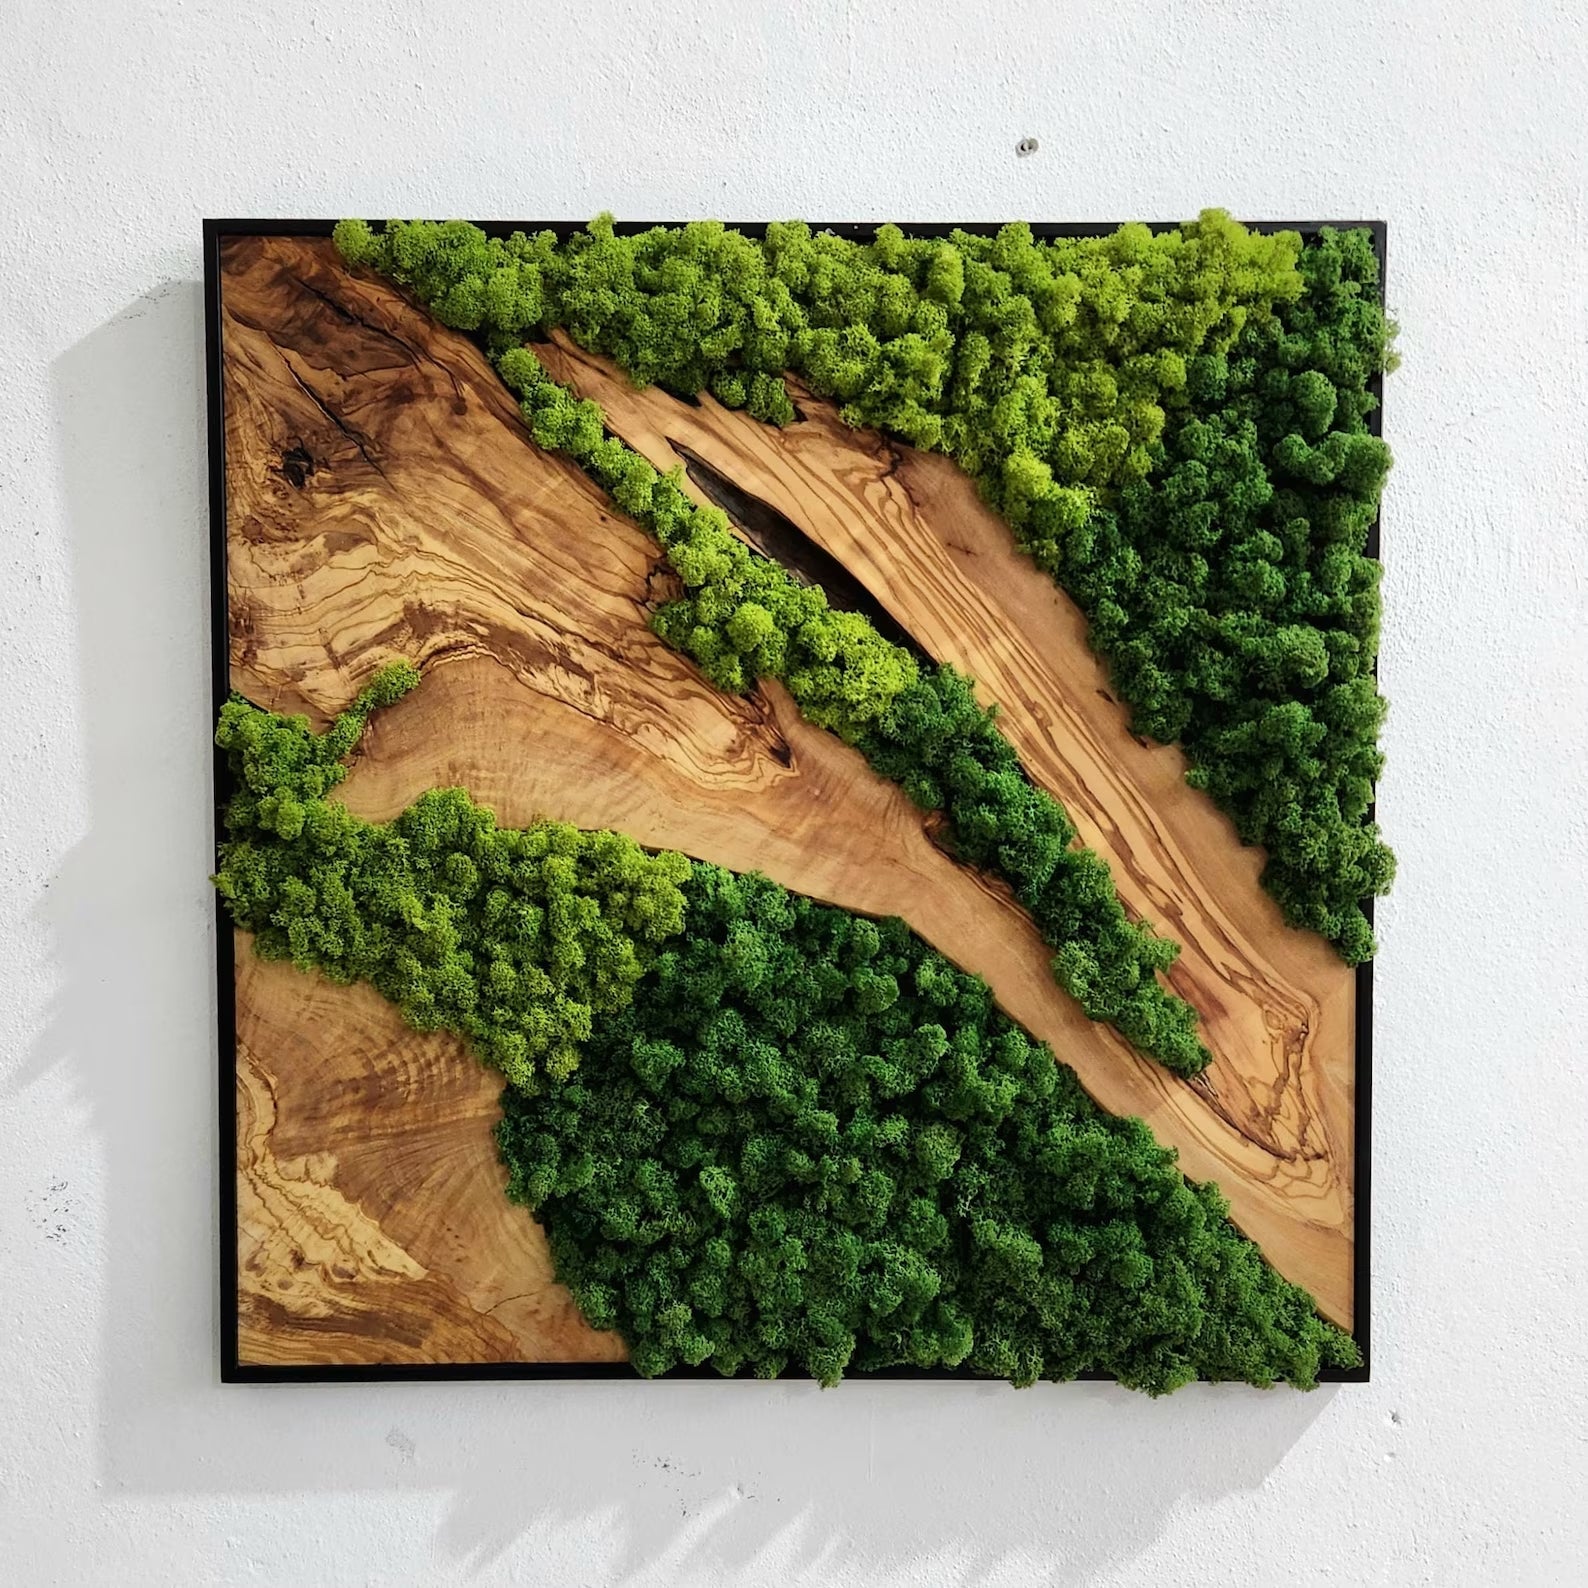 Custom Made Moss and Olive Wood Wall Art 2 Colors | Premium Handmade Wall Sculptures